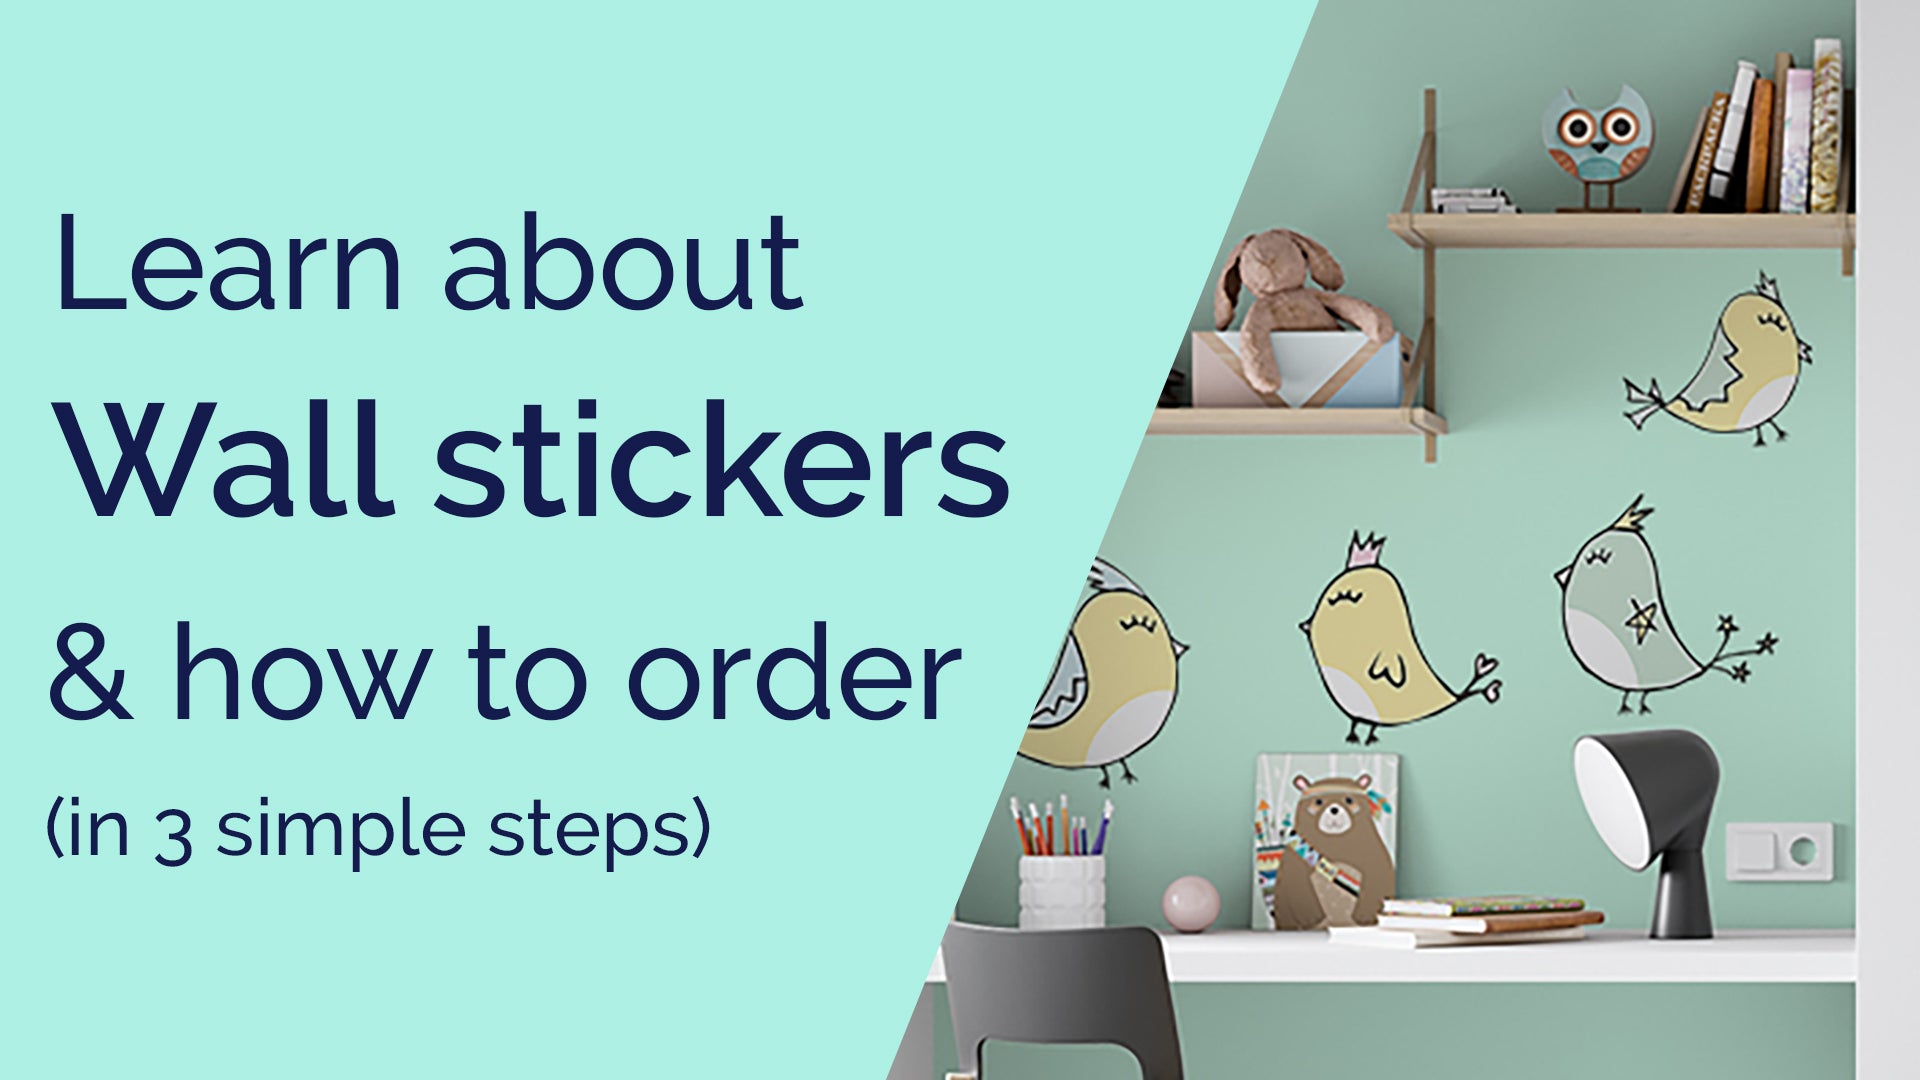 Load video: A video explaining what wall stickers are and how to order them